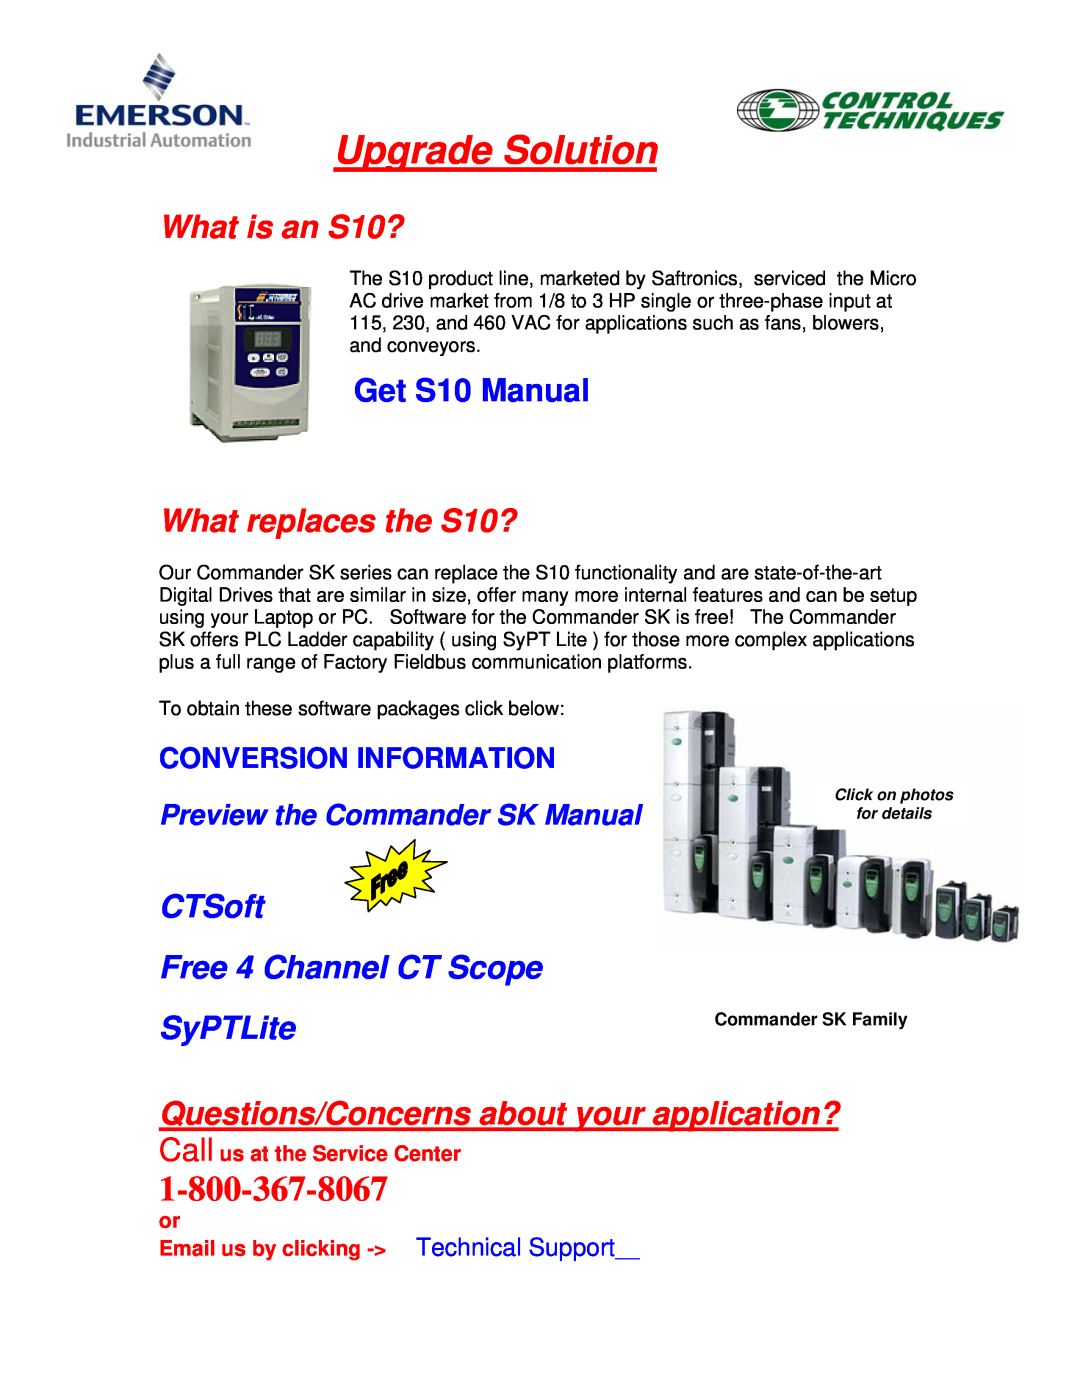 Emerson manual Upgrade Solution, What is an S10?, Get S10 Manual, What replaces the S10?, Conversion Information 